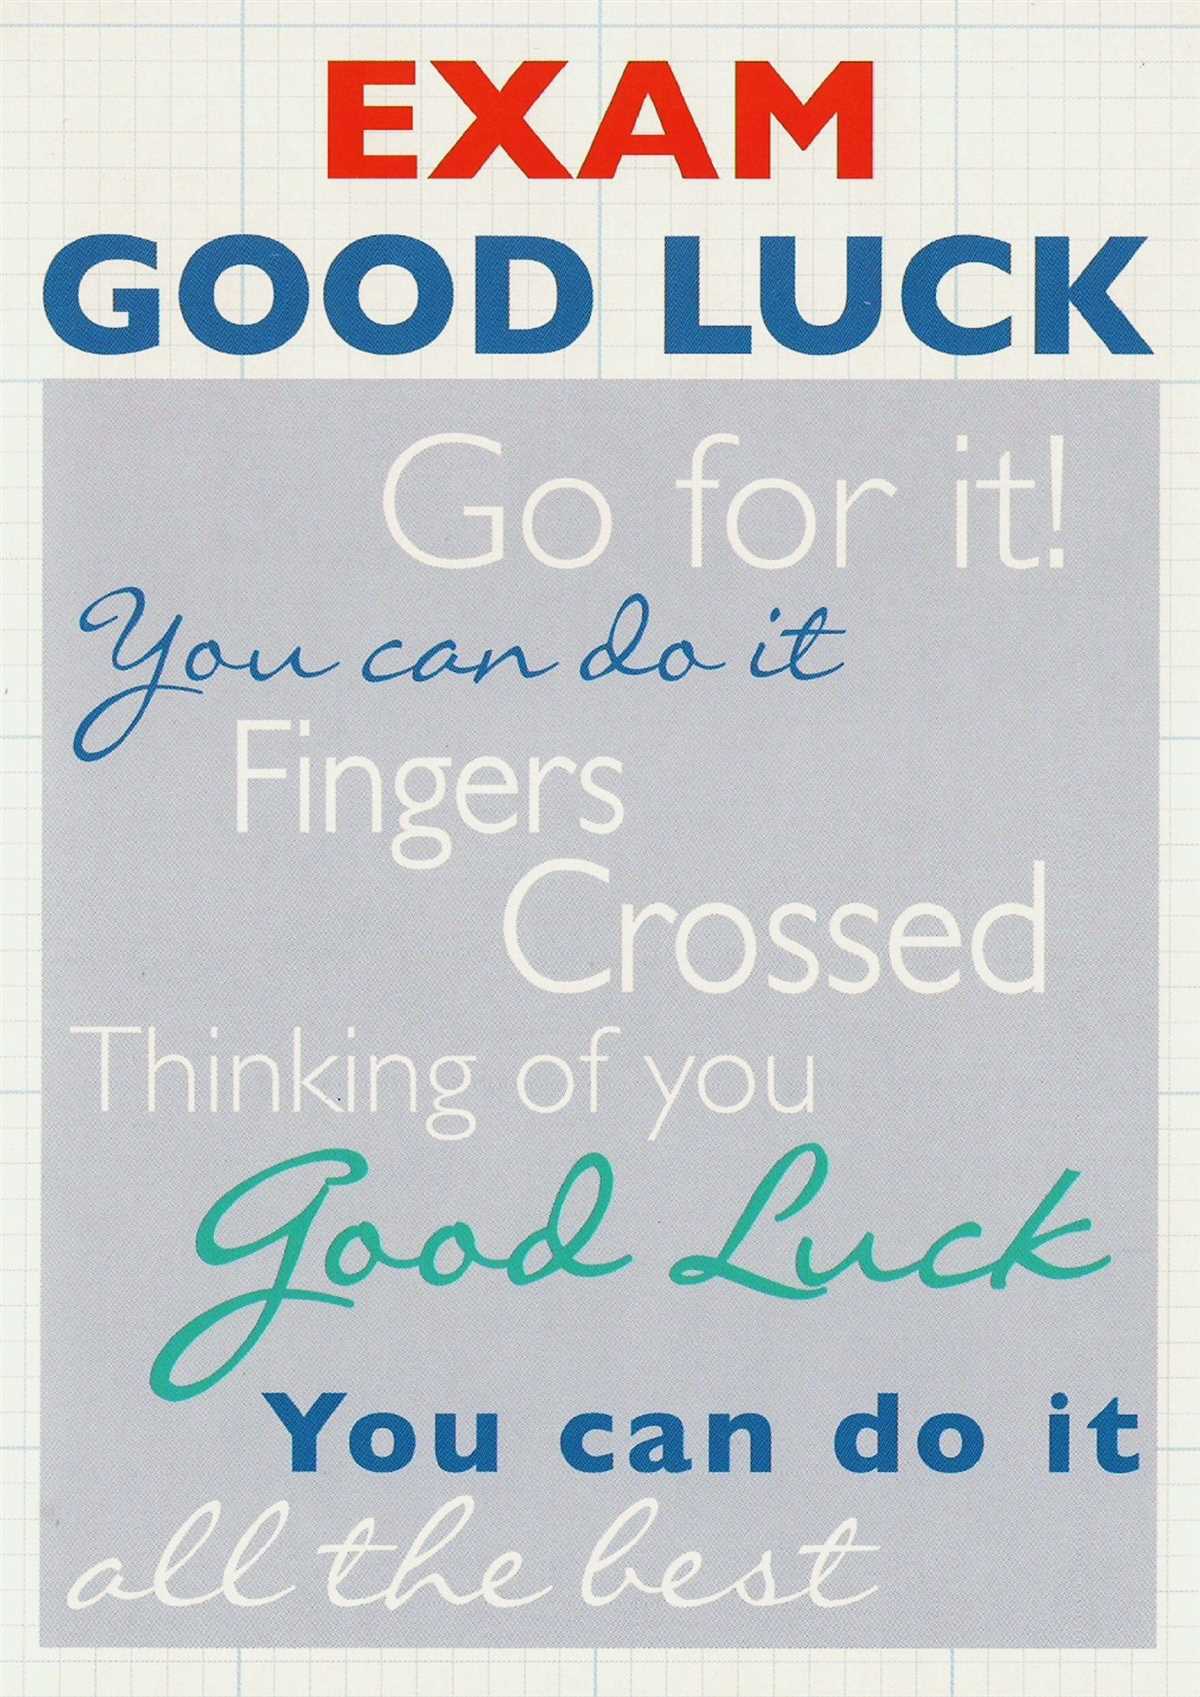 Heartfelt Good Luck Messages for Exams: Show You Care